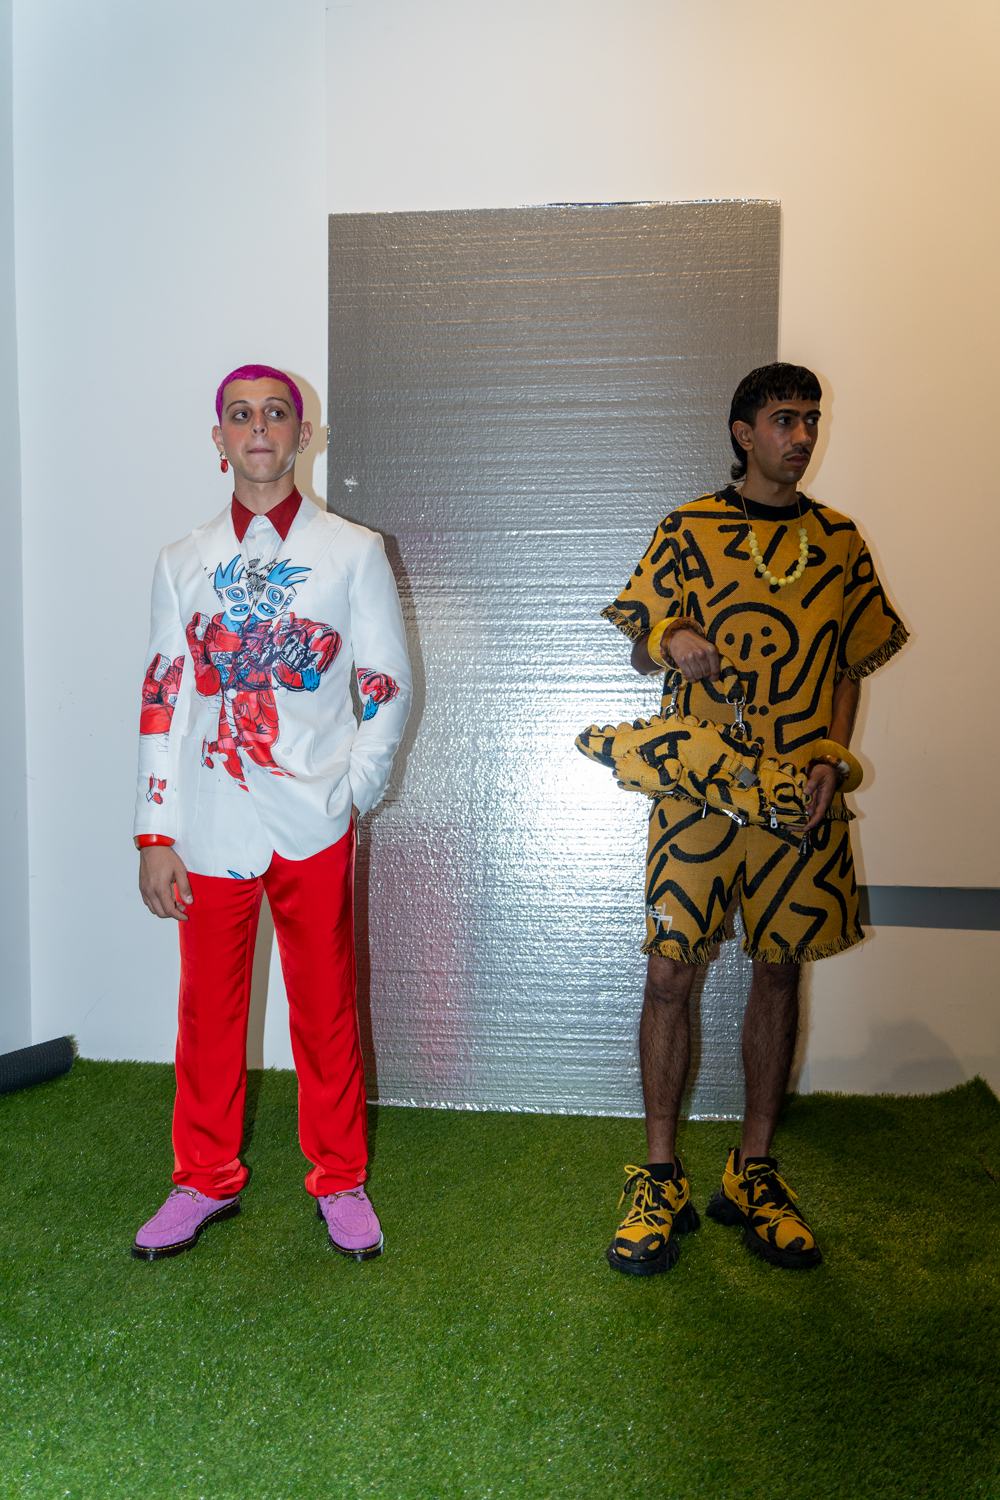 Two models stand in a fashion showroom with a reflective piece of cardboard behind them and artificial turf on the floor. They are wearing clothing from the brand Skyco.